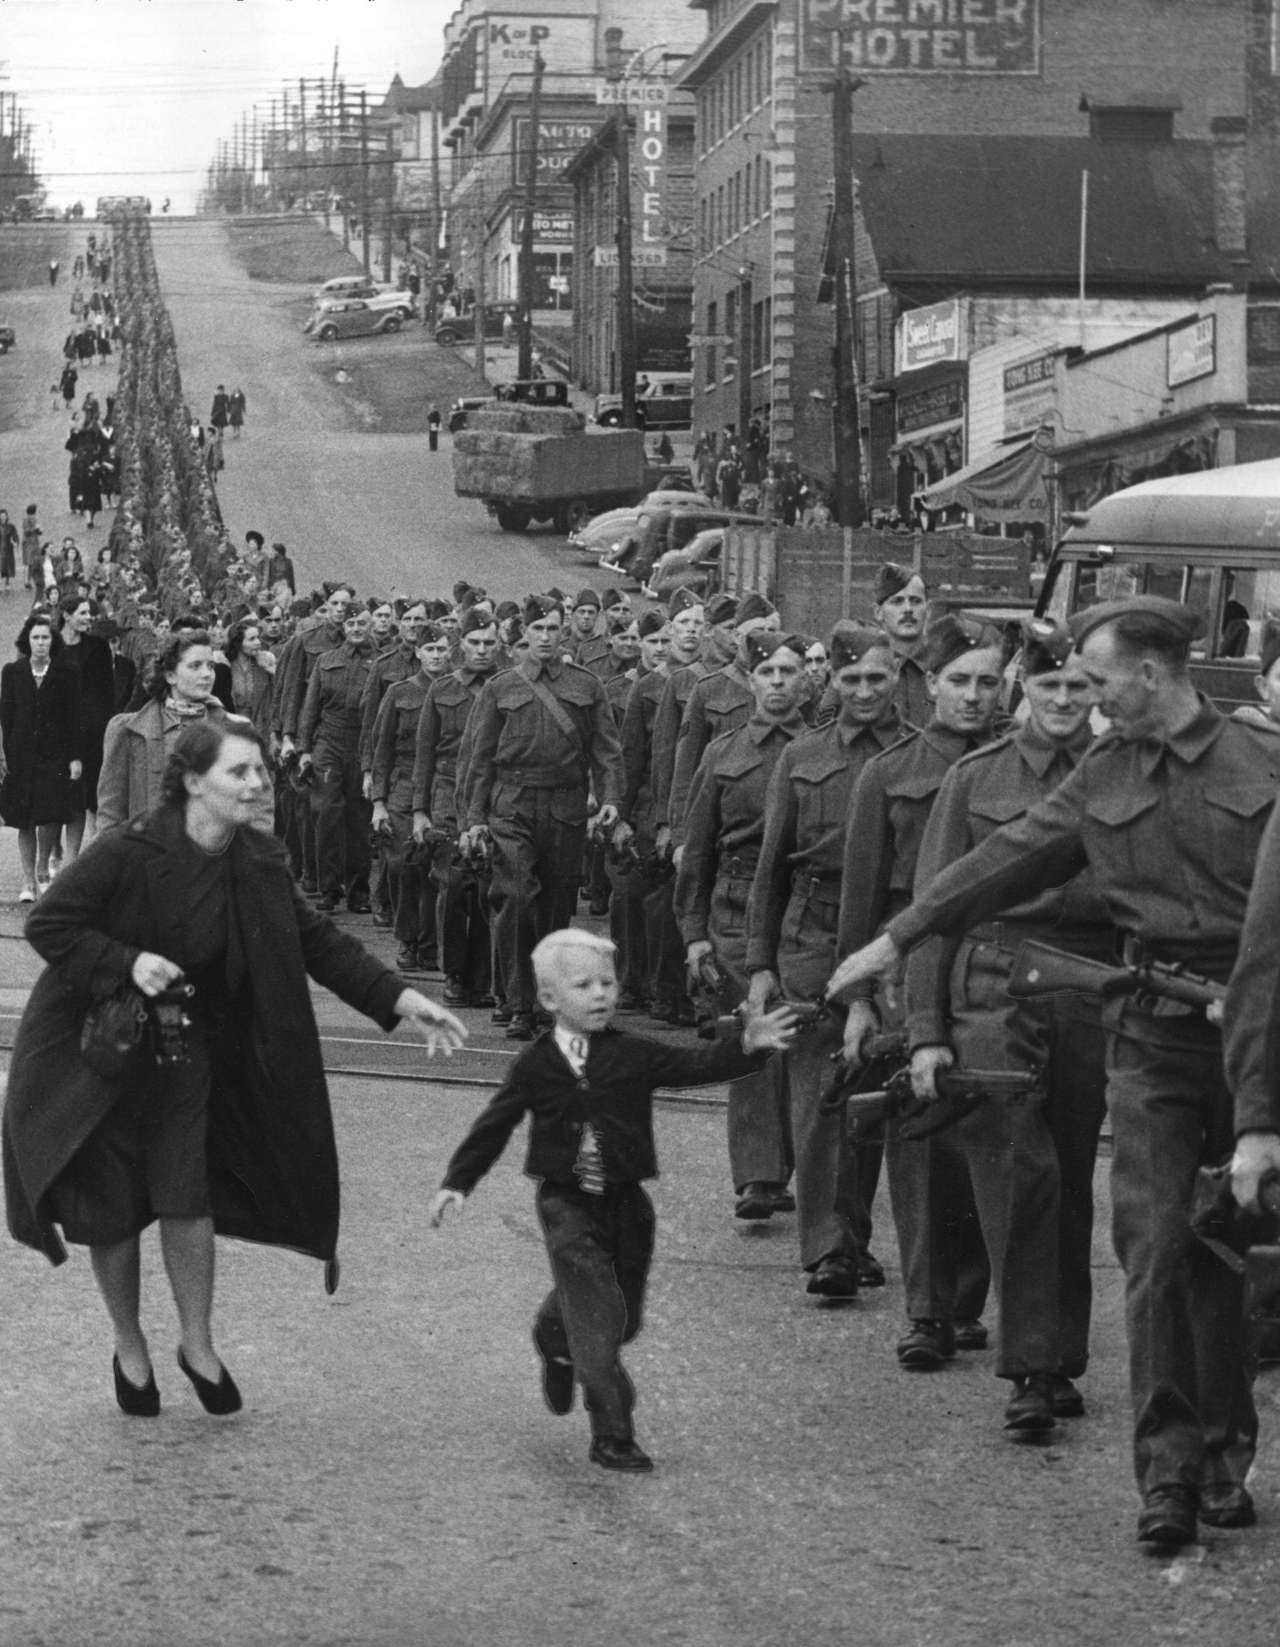 .Wait for Me, Daddy is a photo taken by Claude P. Dettloff on October 1, 1940. The British Columbia Regiment was marching down Eighth Street in British Columbia after Hitler threatened Poland and demanded the town of Danzig. While Dettloff was taking the photo, Warren "Whitey" Bernard ran away from his mother to his father, Private Jack Bernard. The picture received extensive exposure and was used in war-bond drives.